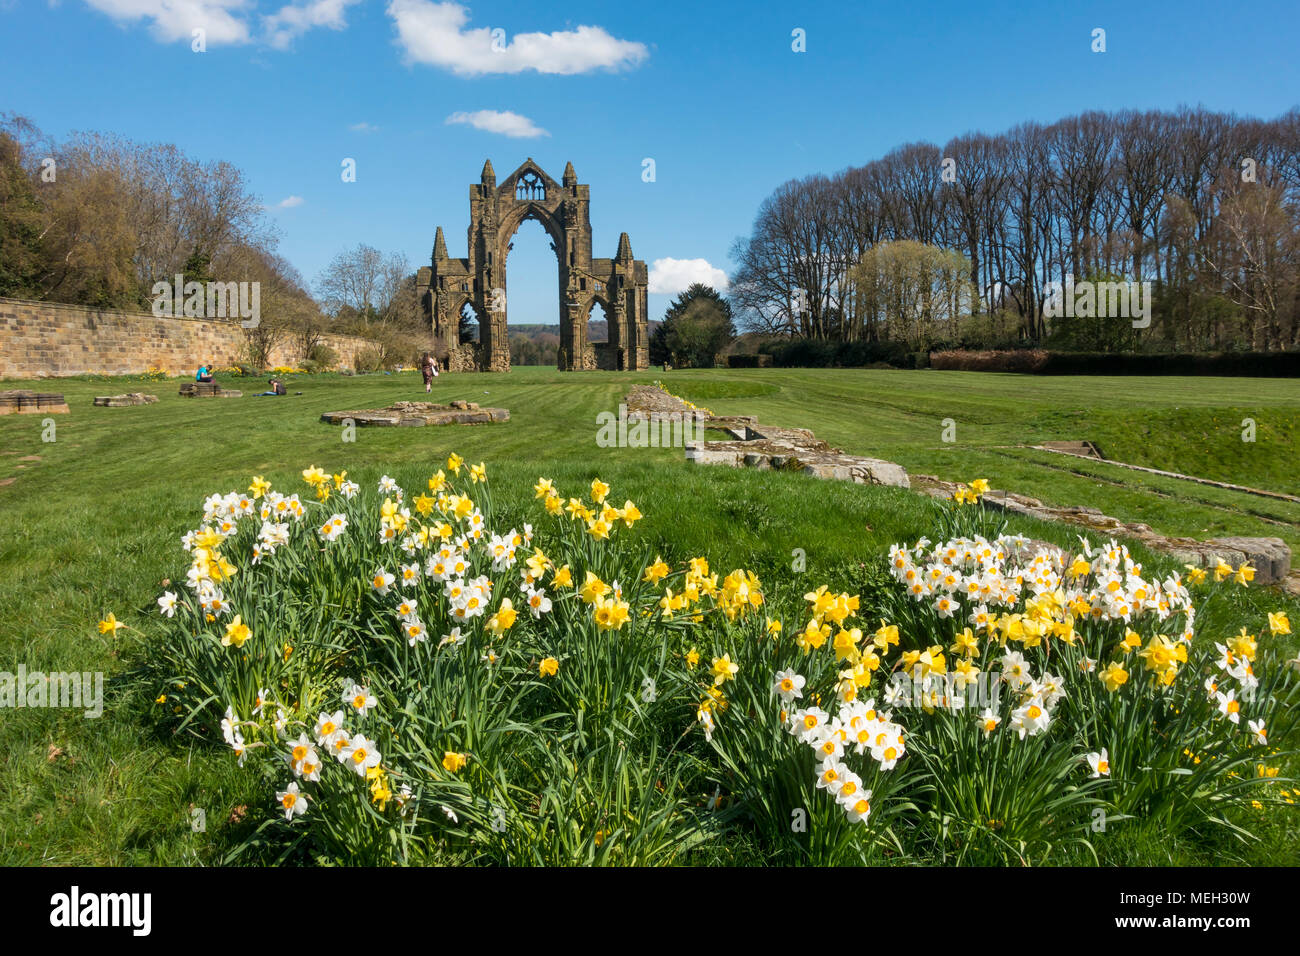 The ruins of the east end of a 14th century  Augustinian priory founded by the Bruce family, afterwards Kings of Scotland with daffodils in spring Stock Photo